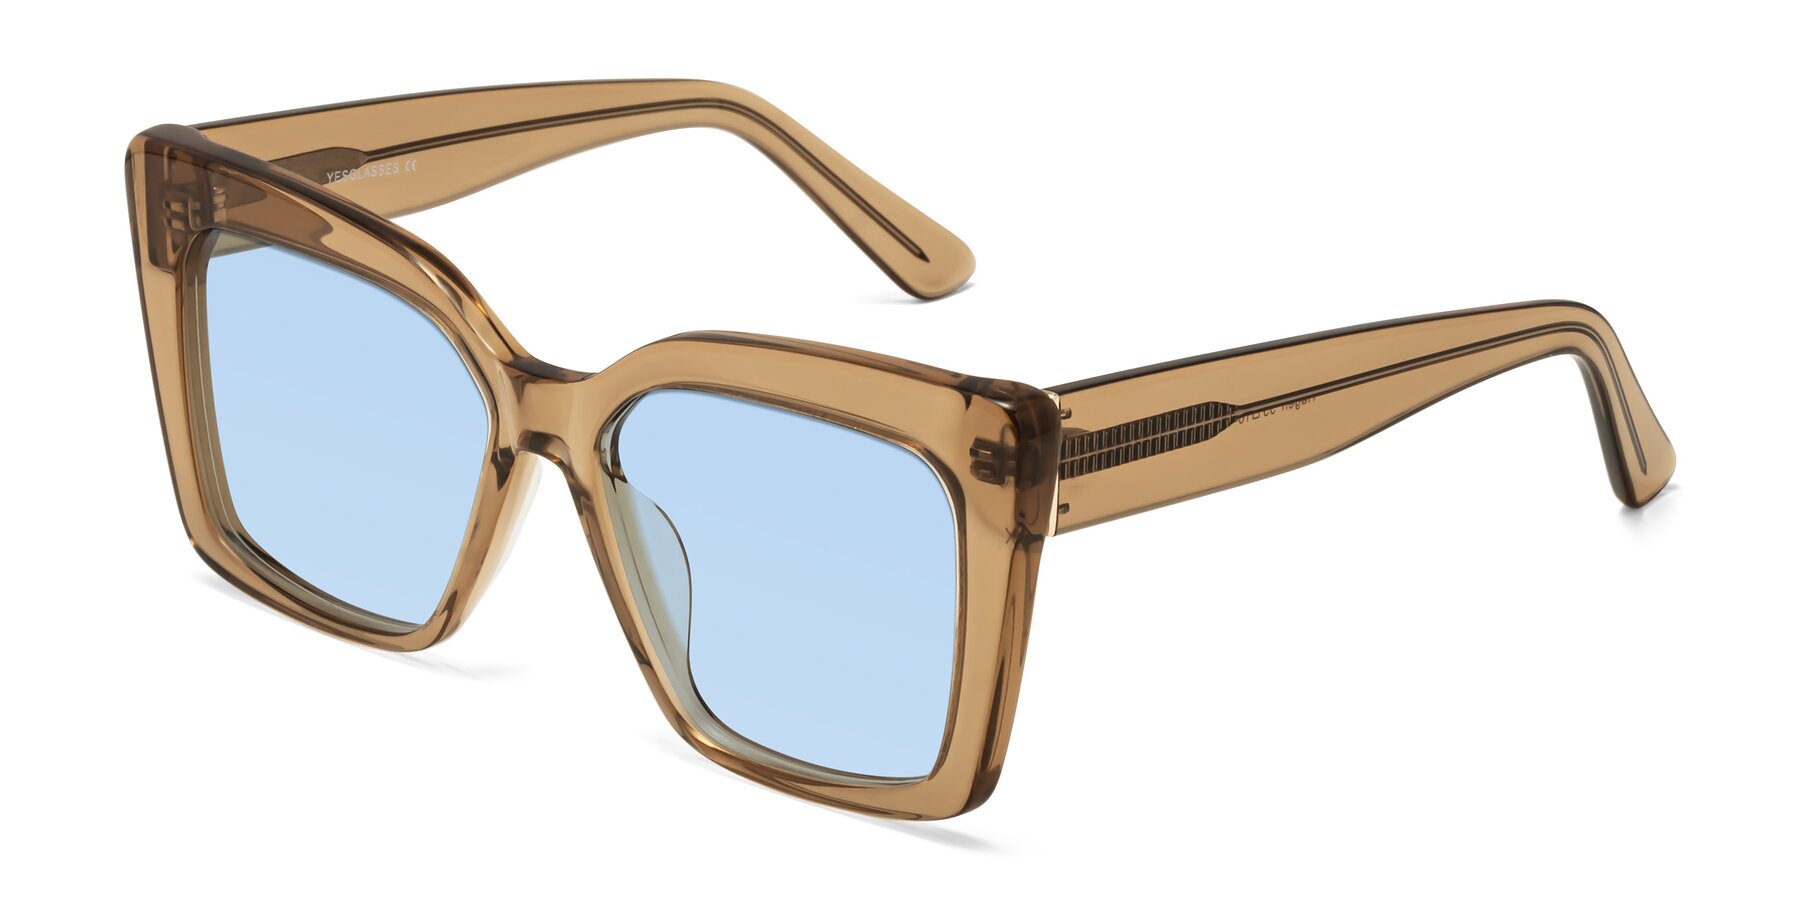 Angle of Hagen in Translucent Brown with Light Blue Tinted Lenses